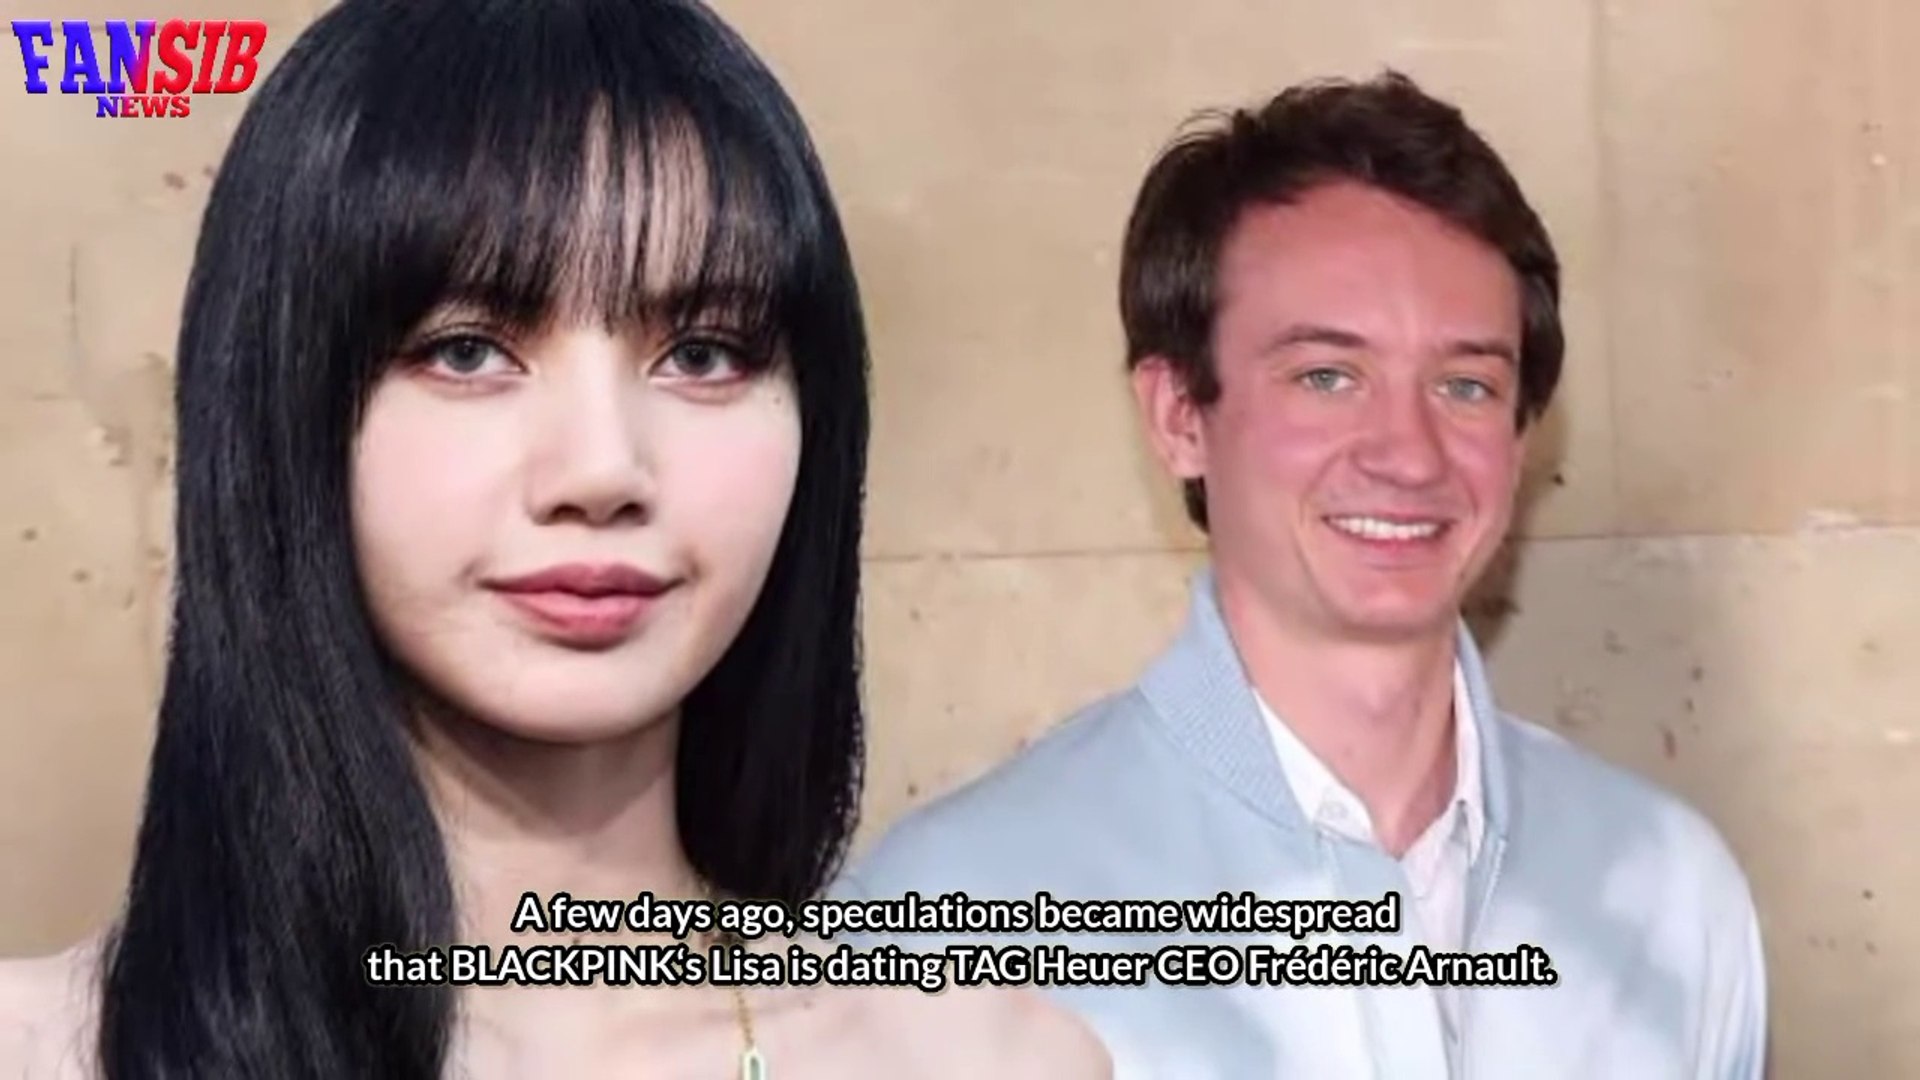 Is BLACKPINK's Lisa dating TAG Heuer's CEO Frederic Arnault